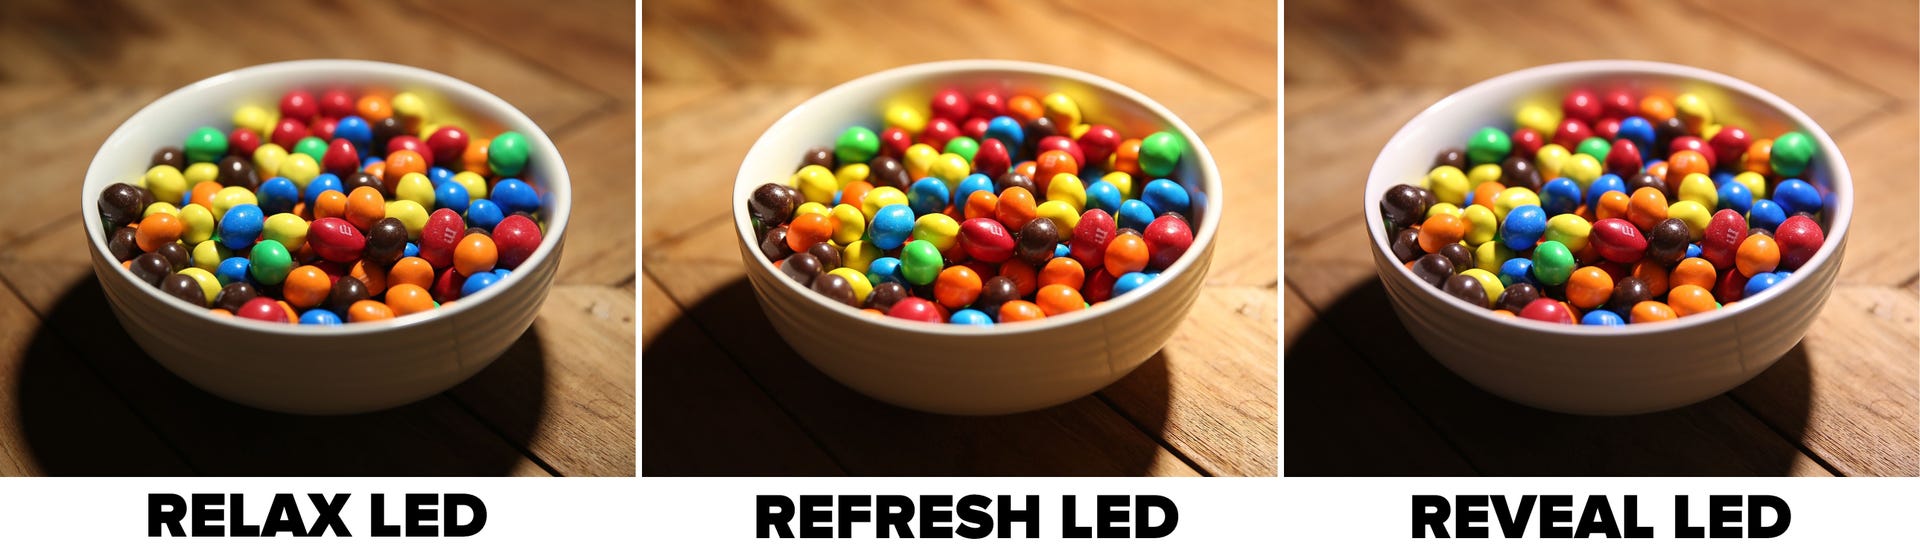 ge-hd-light-relax-refresh-reveal-leds-color-quality-mms.jpg